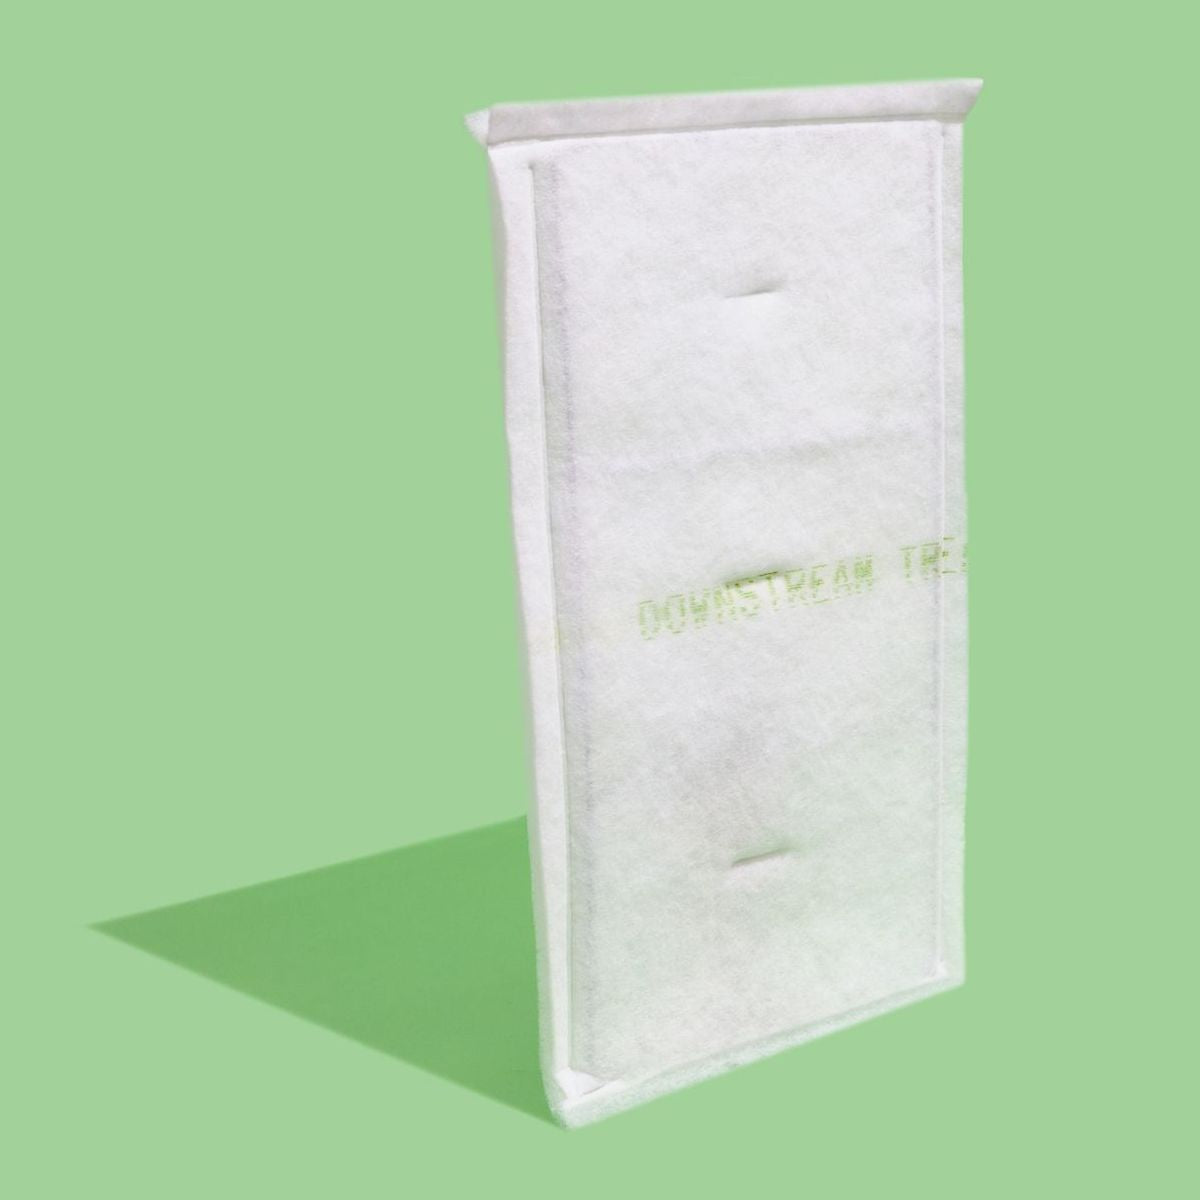 YoorAir_2-Ply_Antimicrobial_Filter_stand_up